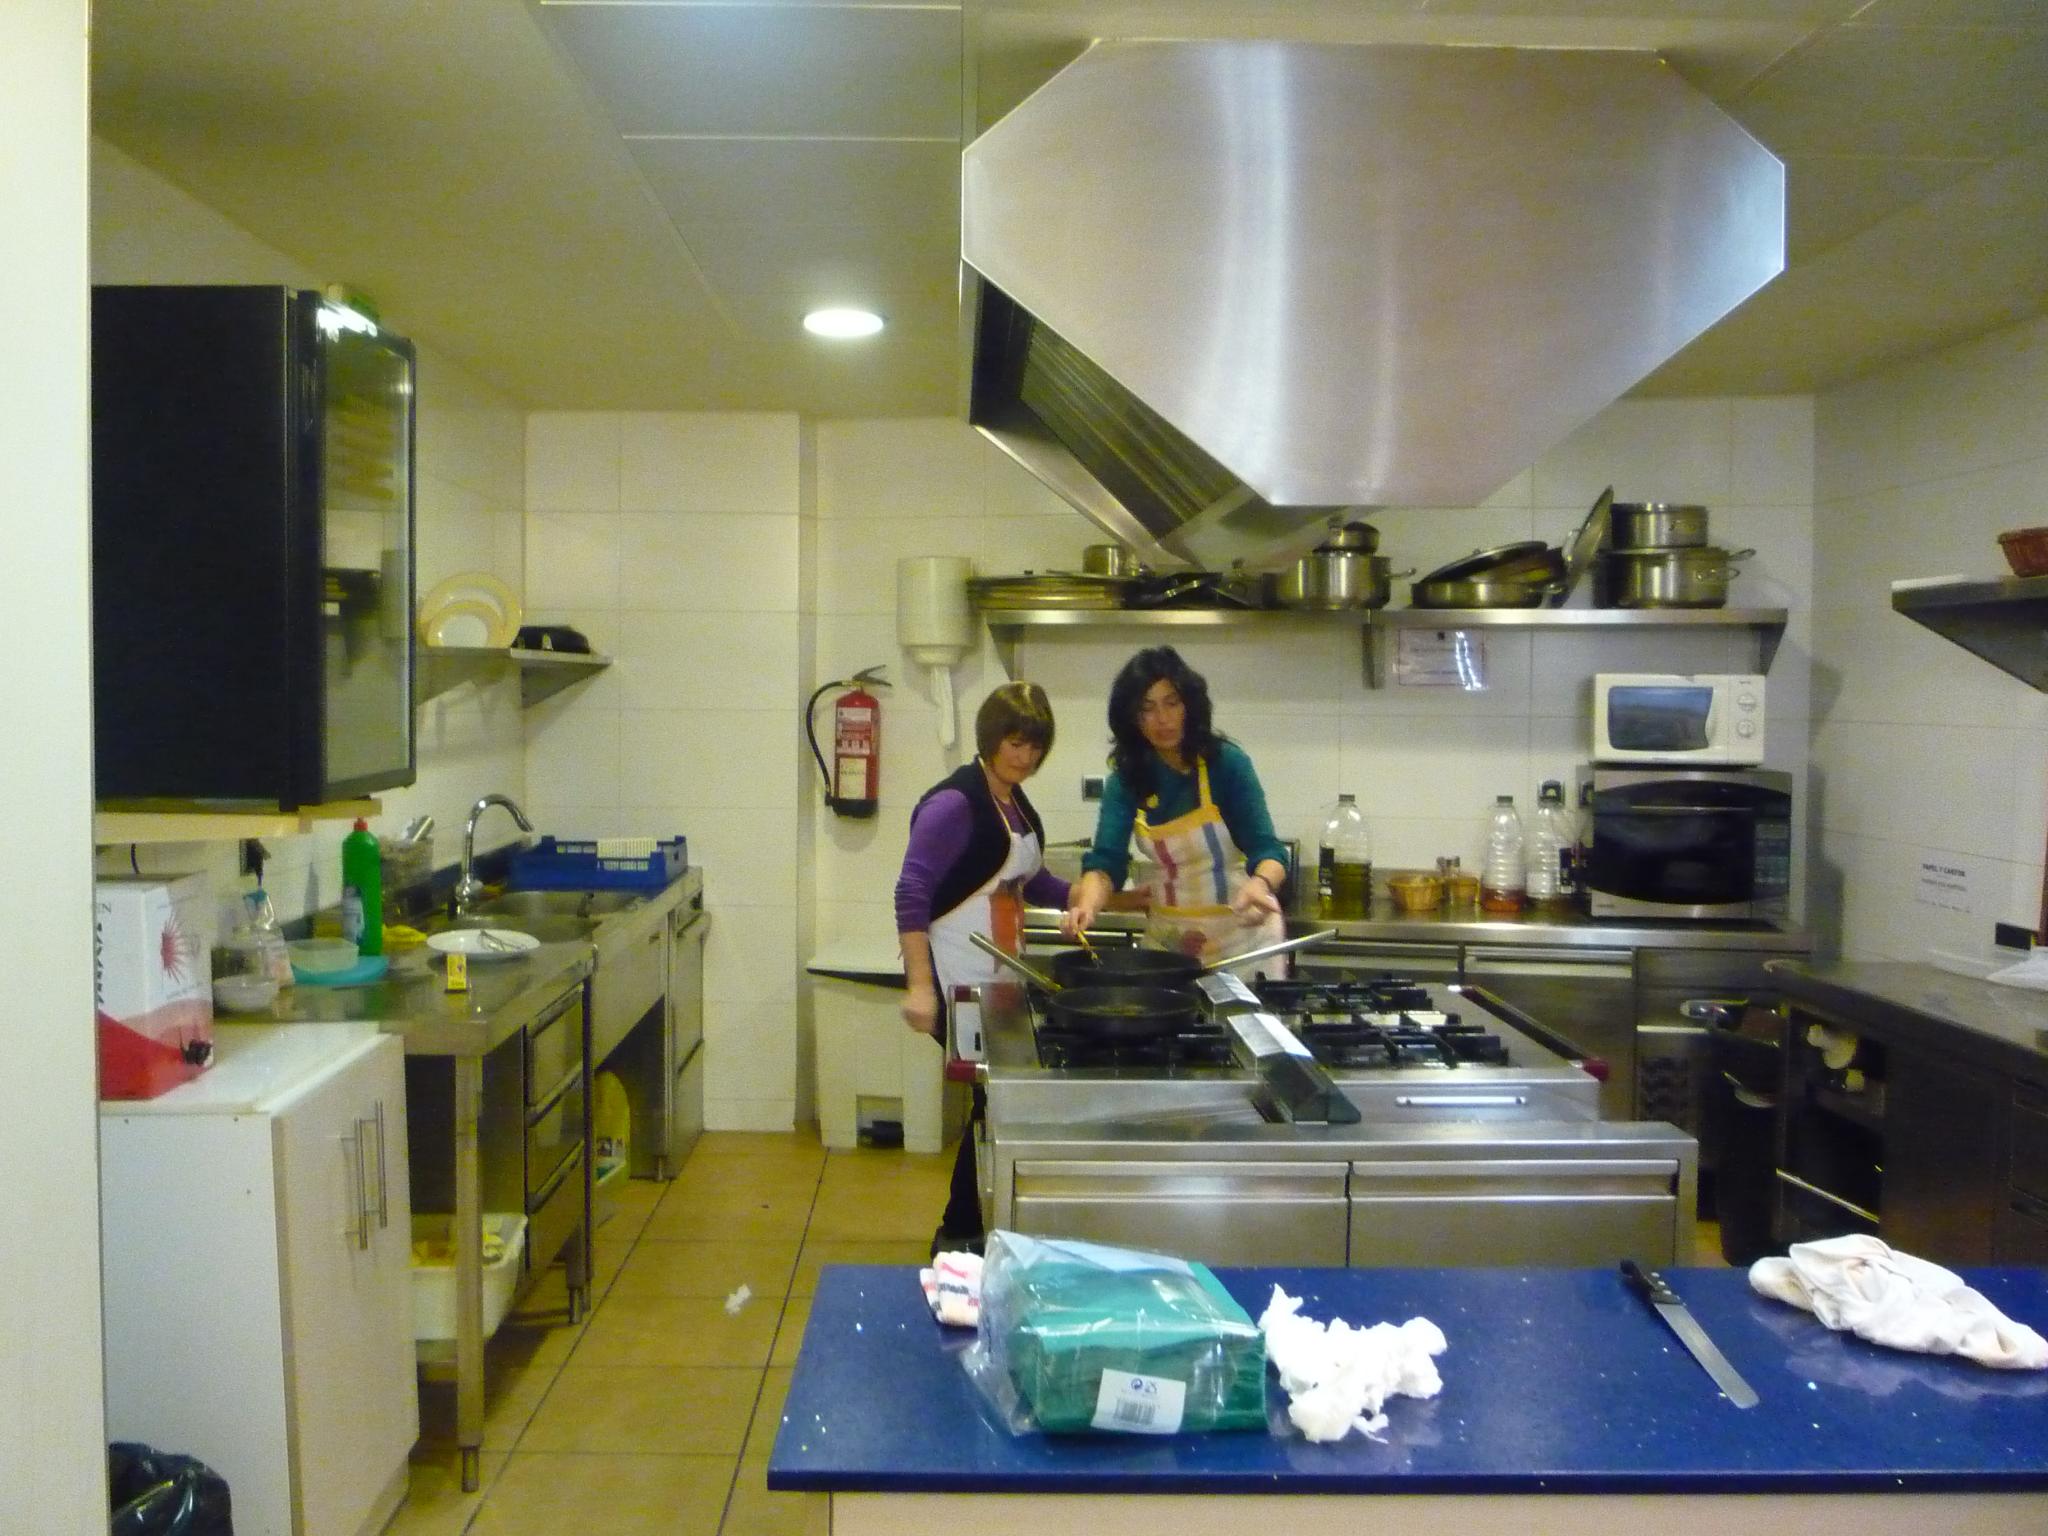 two women preparing food in a small kitchen